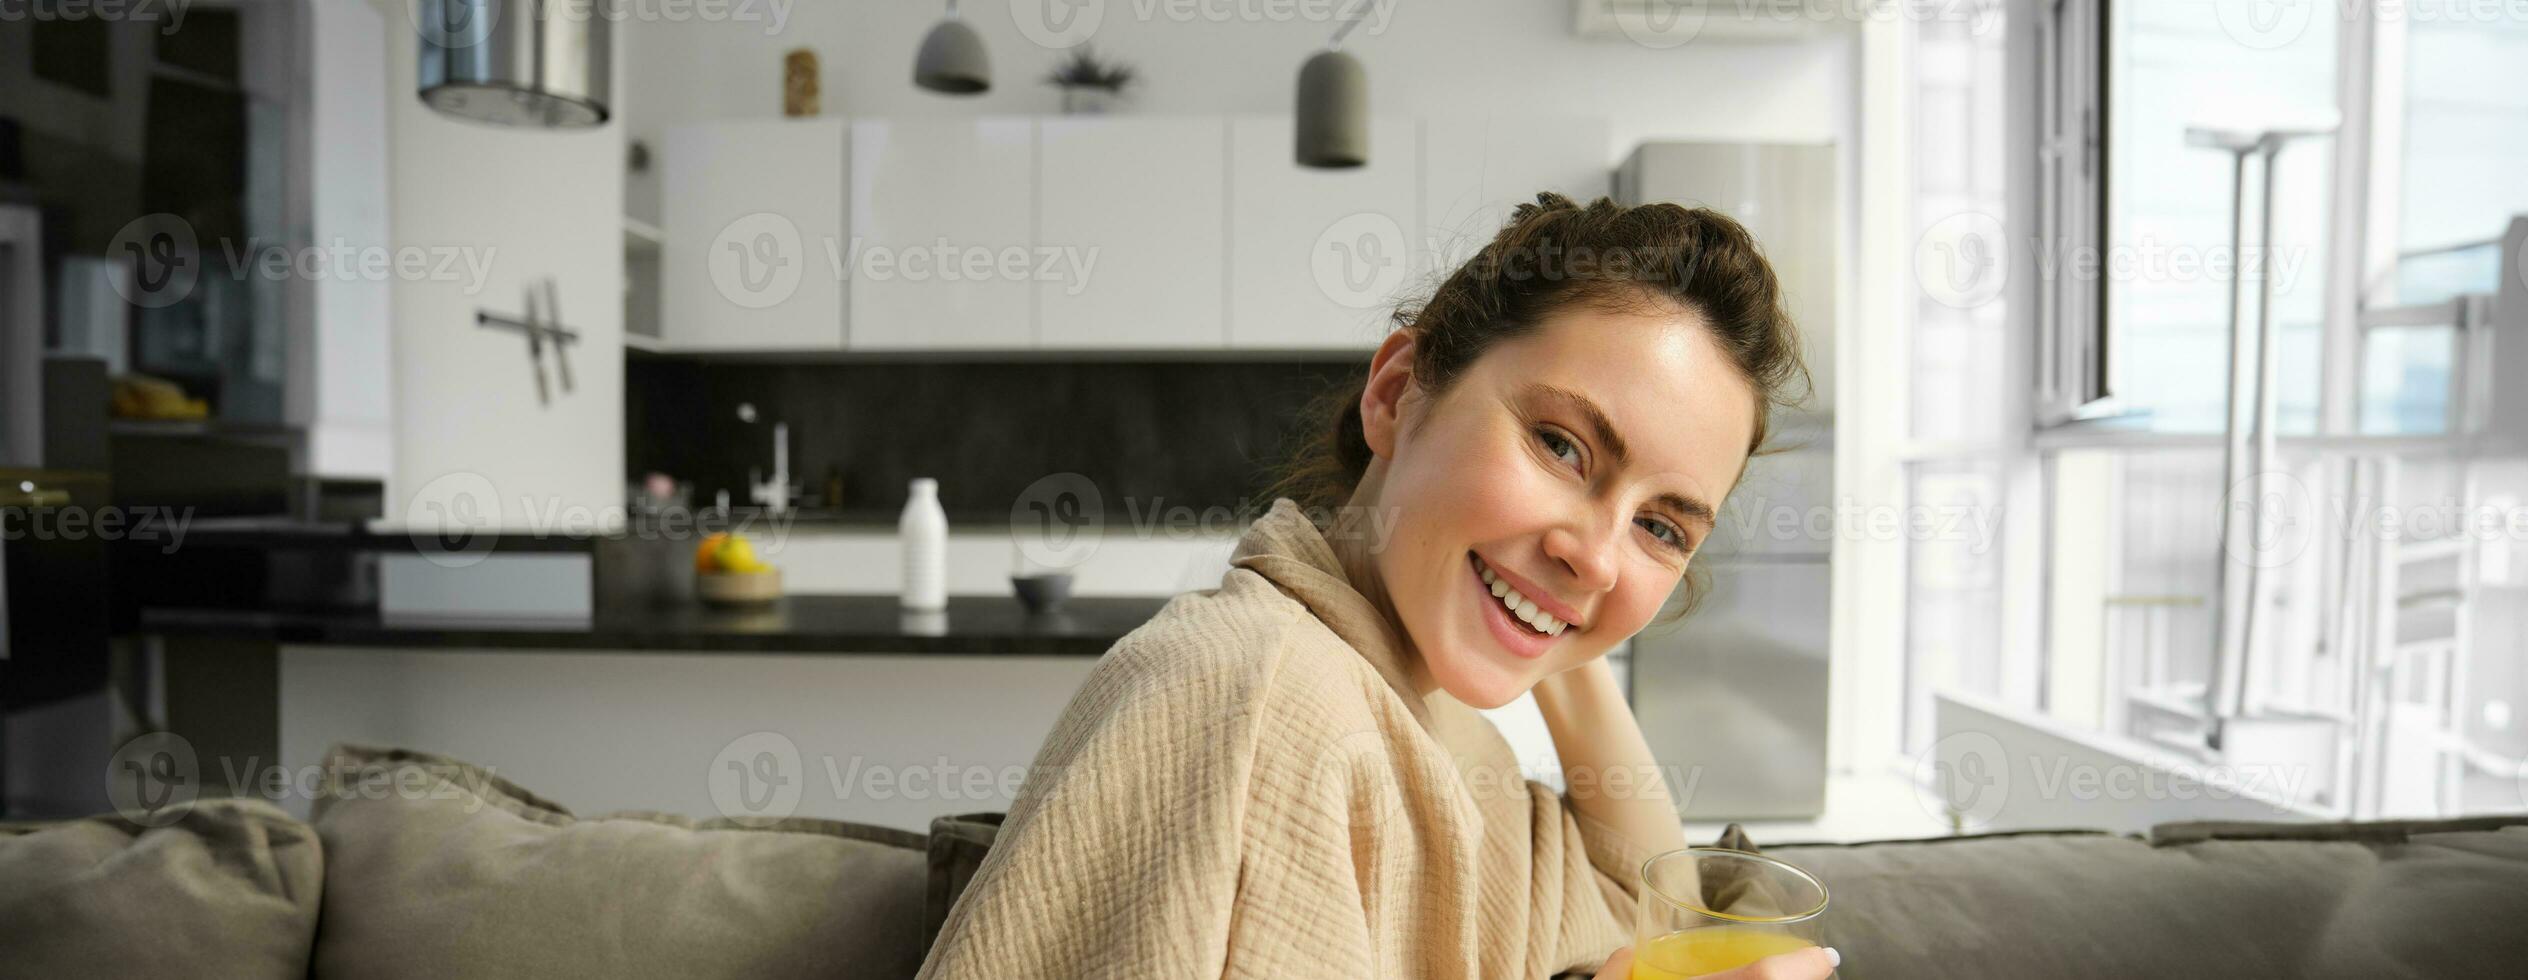 Women wellbeing and lifestyle. Beautiful young woman on sofa, drinking orange juice, relaxing at home on sofa, resting in the morning in living room photo